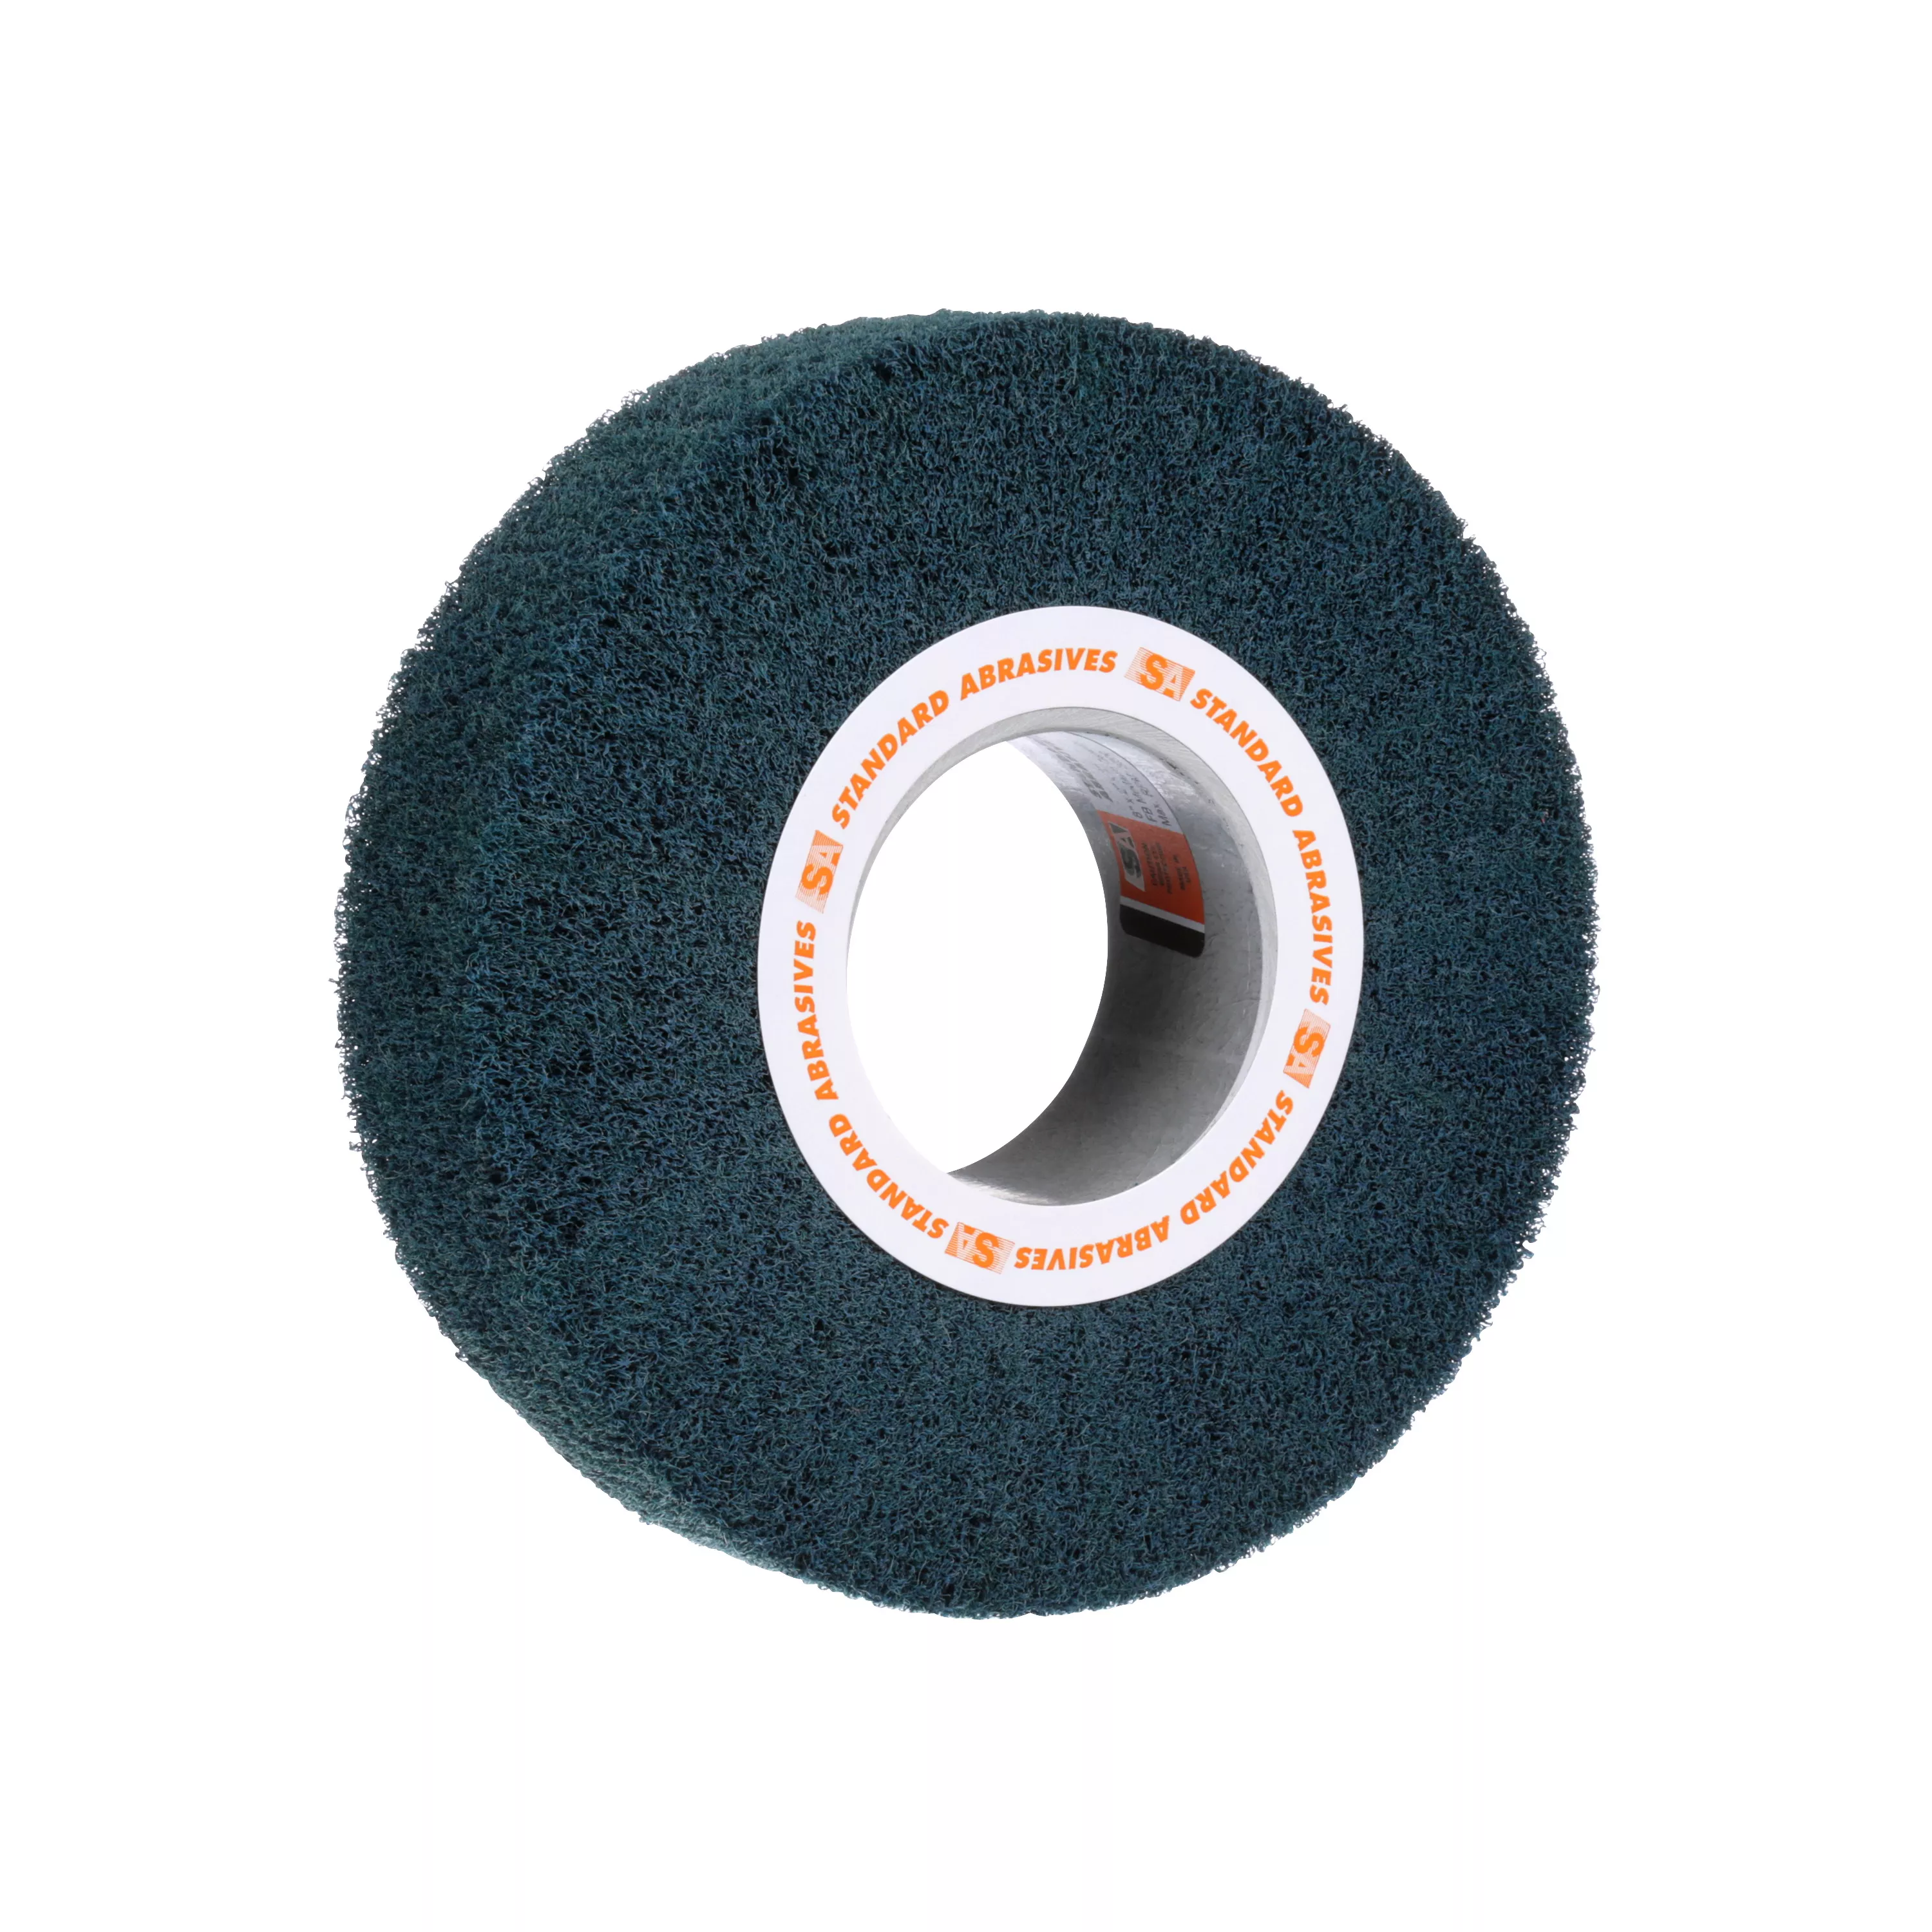 Standard Abrasives™ Buff and Blend HS-F Flap Brush 875175, 8 in x 2 in x
3 in FB050 23-21 A MED Medium Density